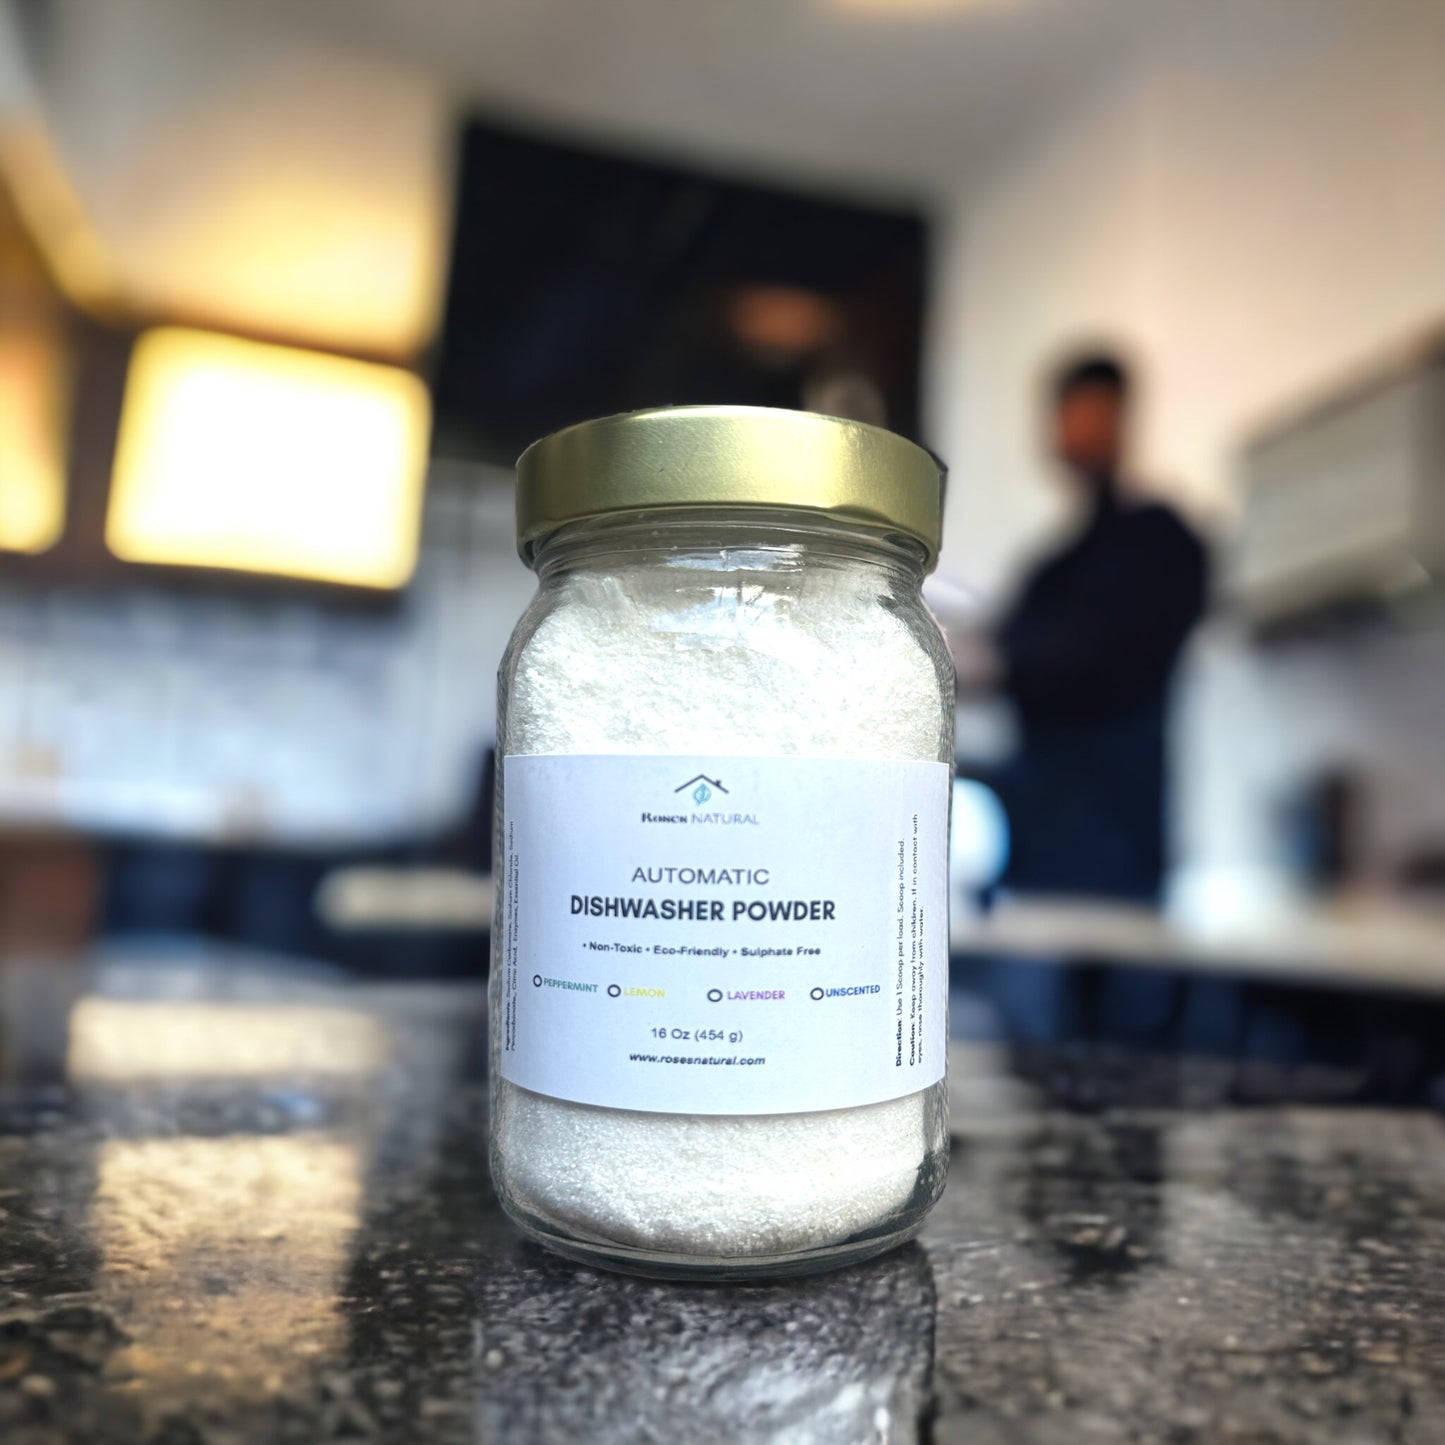 Automatic Dishwasher Powder - Powered by Enzymes